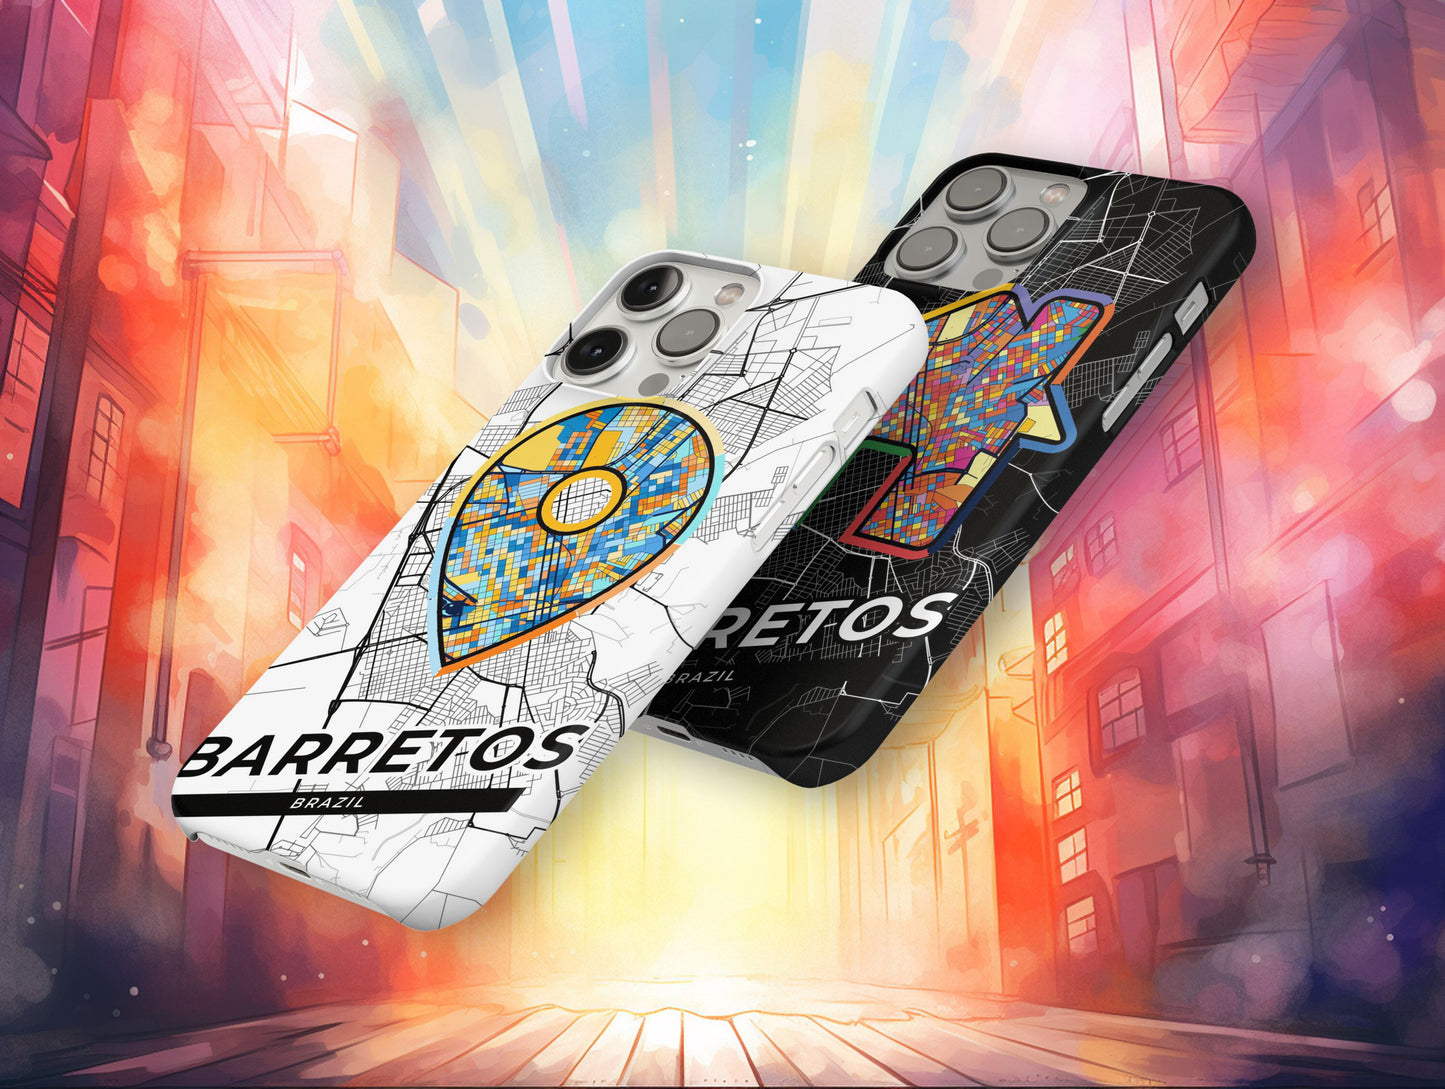 Barretos Brazil slim phone case with colorful icon. Birthday, wedding or housewarming gift. Couple match cases.